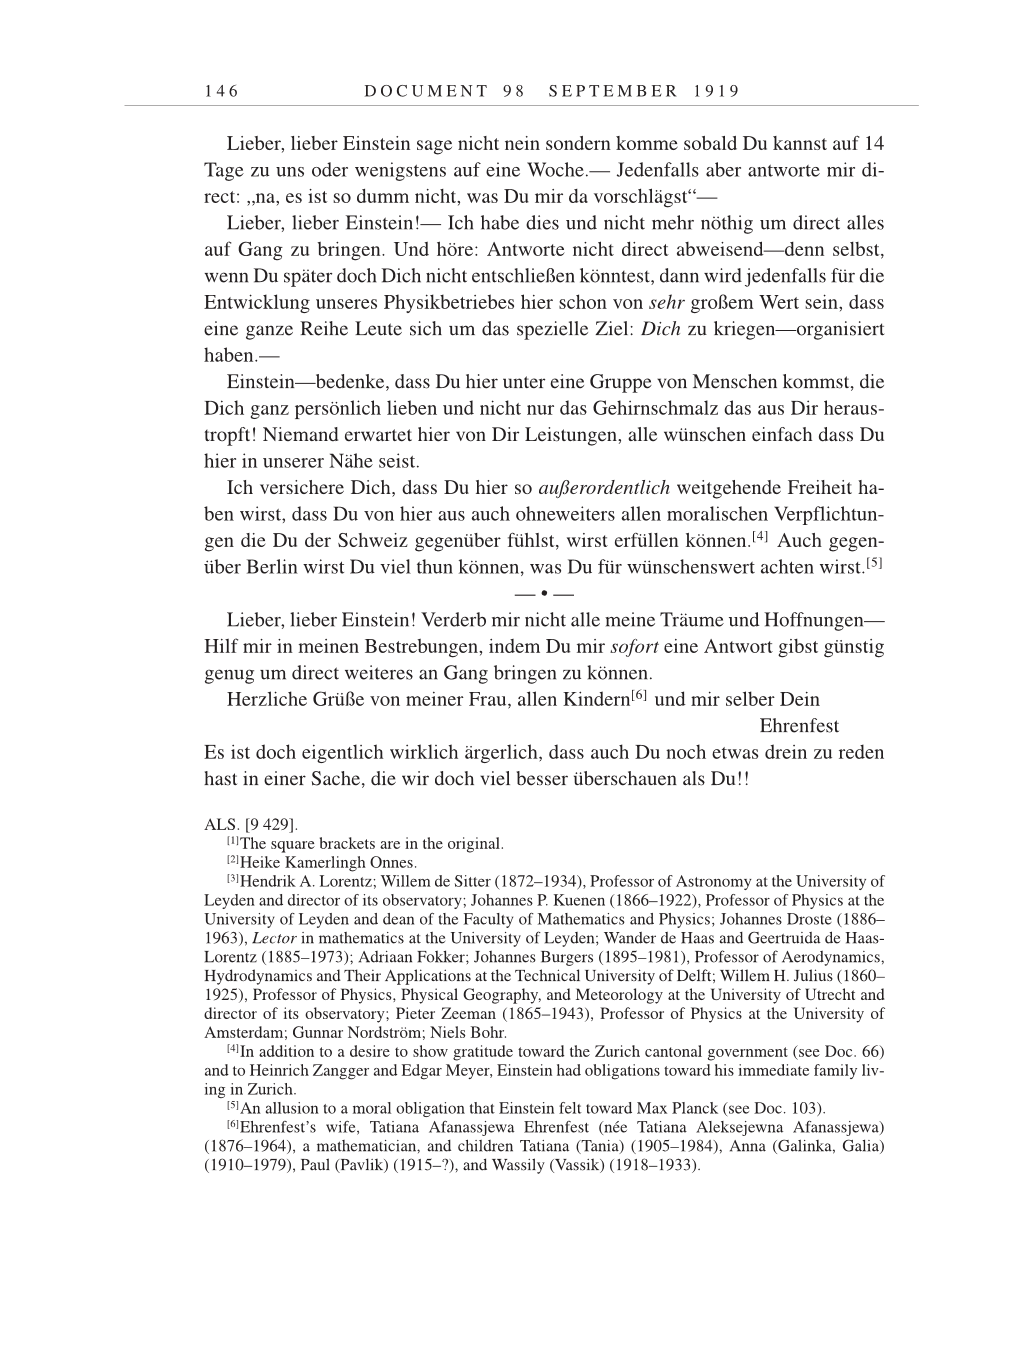 Volume 9: The Berlin Years: Correspondence January 1919-April 1920 page 146